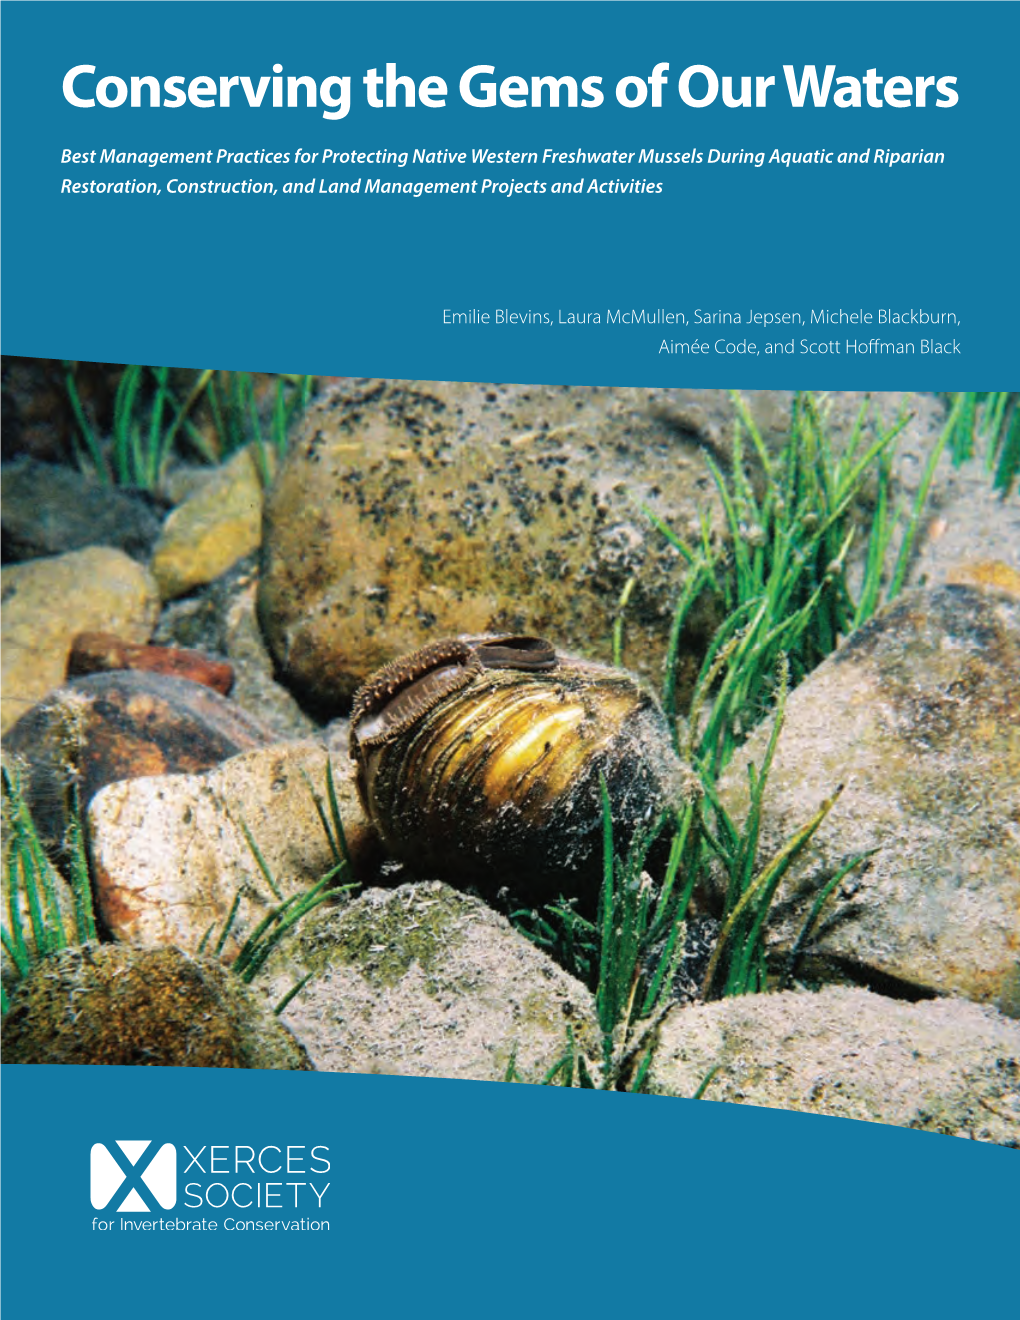 Freshwater Mussels During Aquatic and Riparian Restoration, Construction, and Land Management Projects and Activities